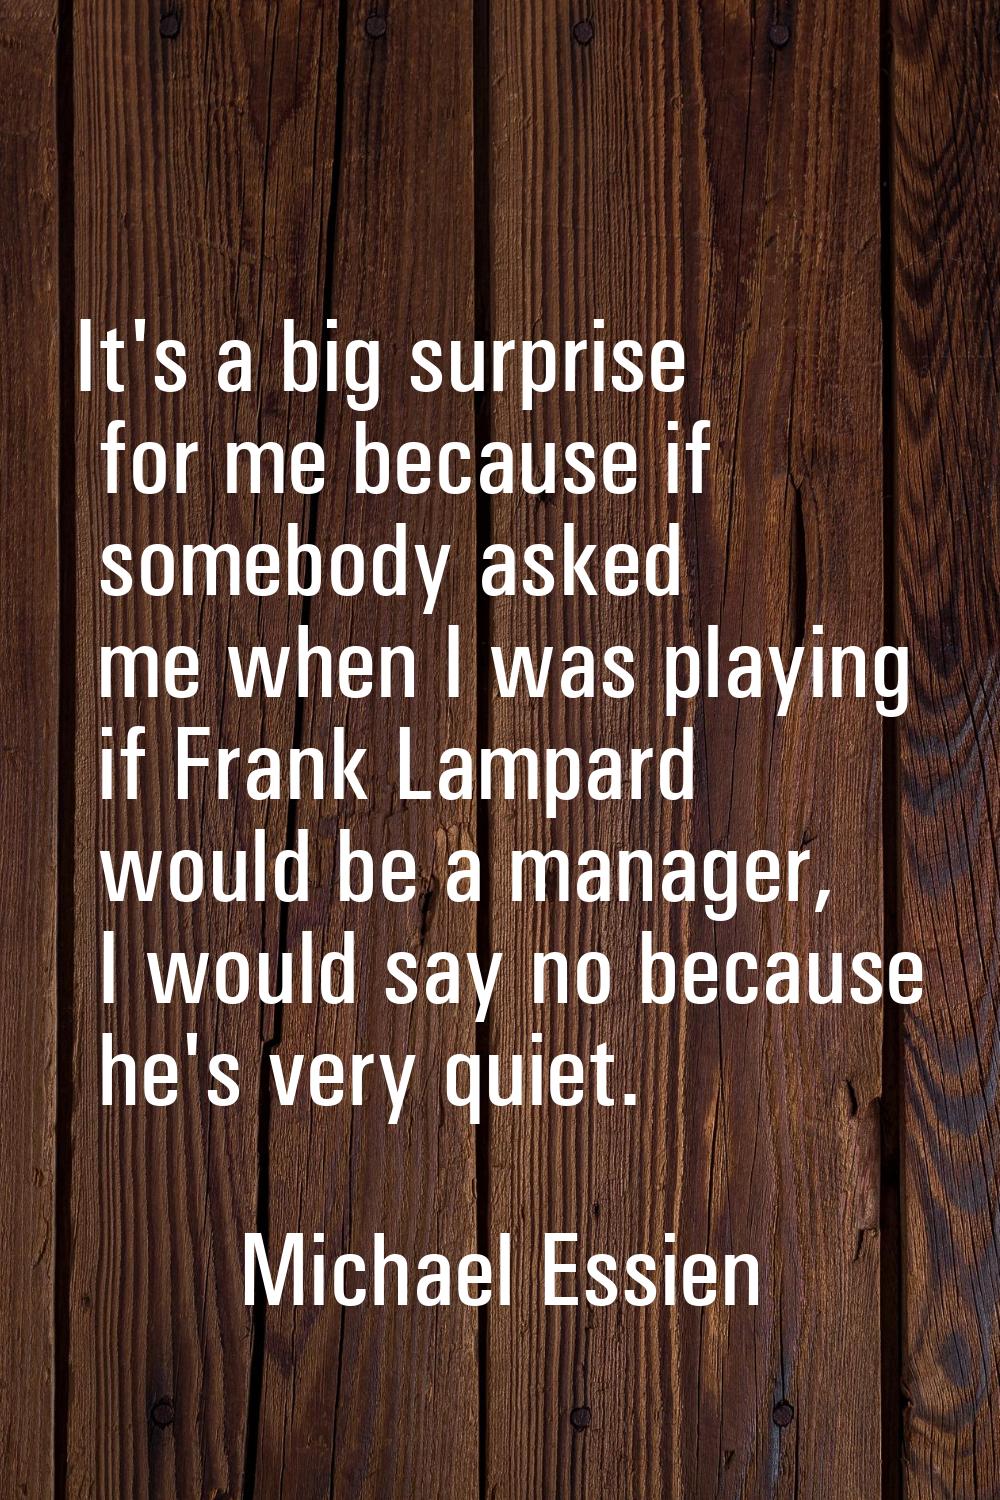 It's a big surprise for me because if somebody asked me when I was playing if Frank Lampard would b